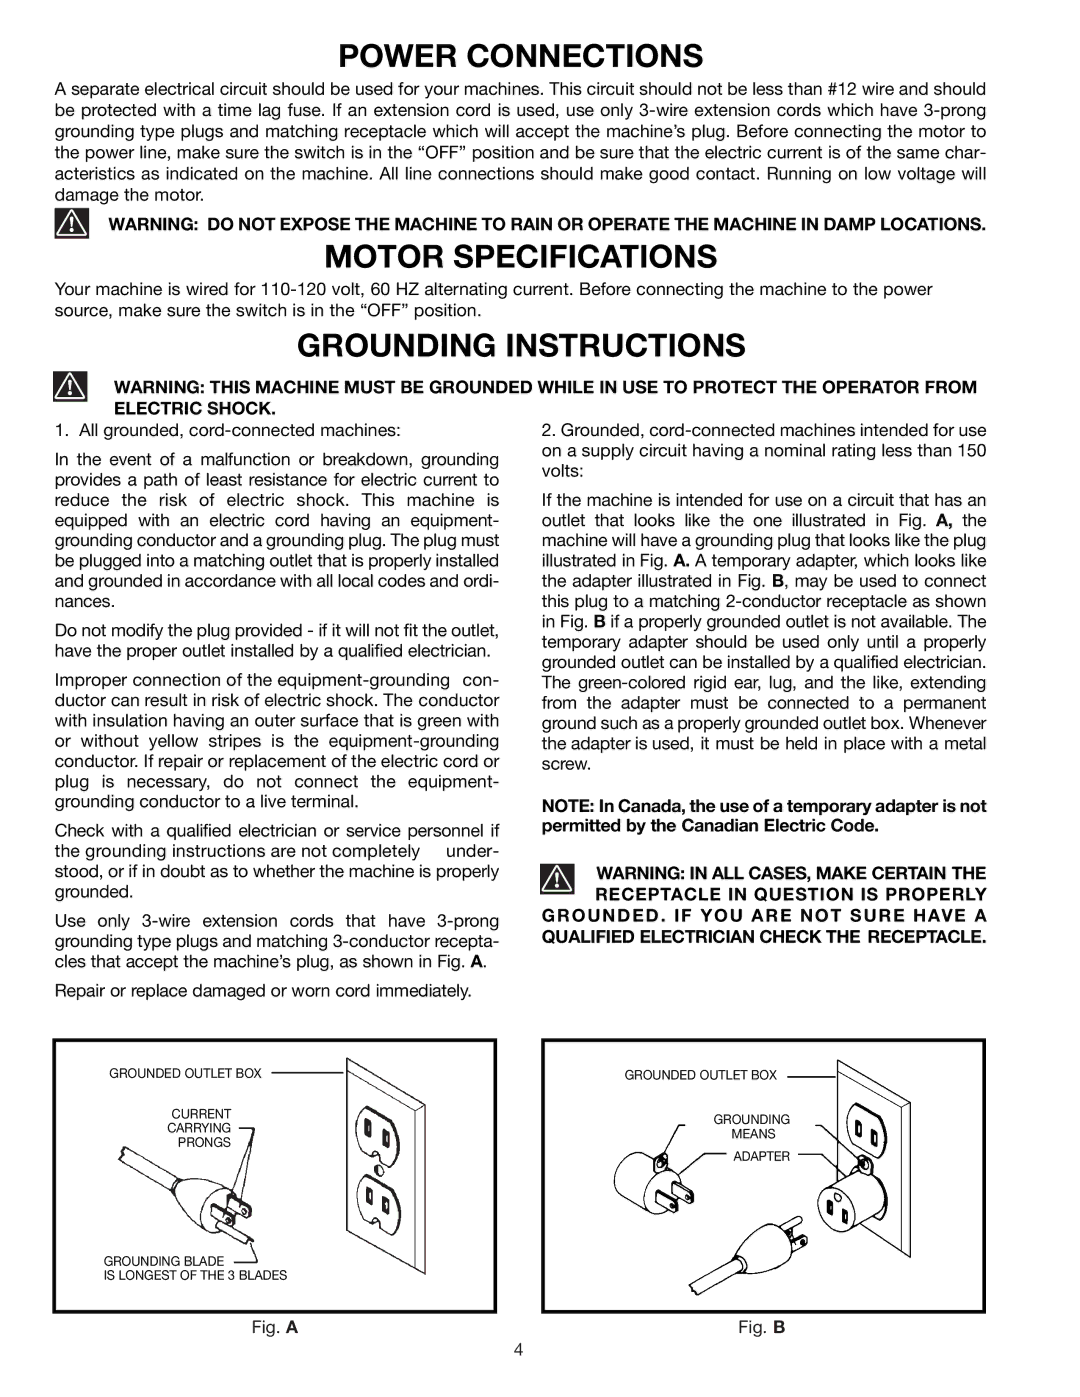 Porter-Cable 36-225 instruction manual Power Connections, Motor Specifications, Grounding Instructions 